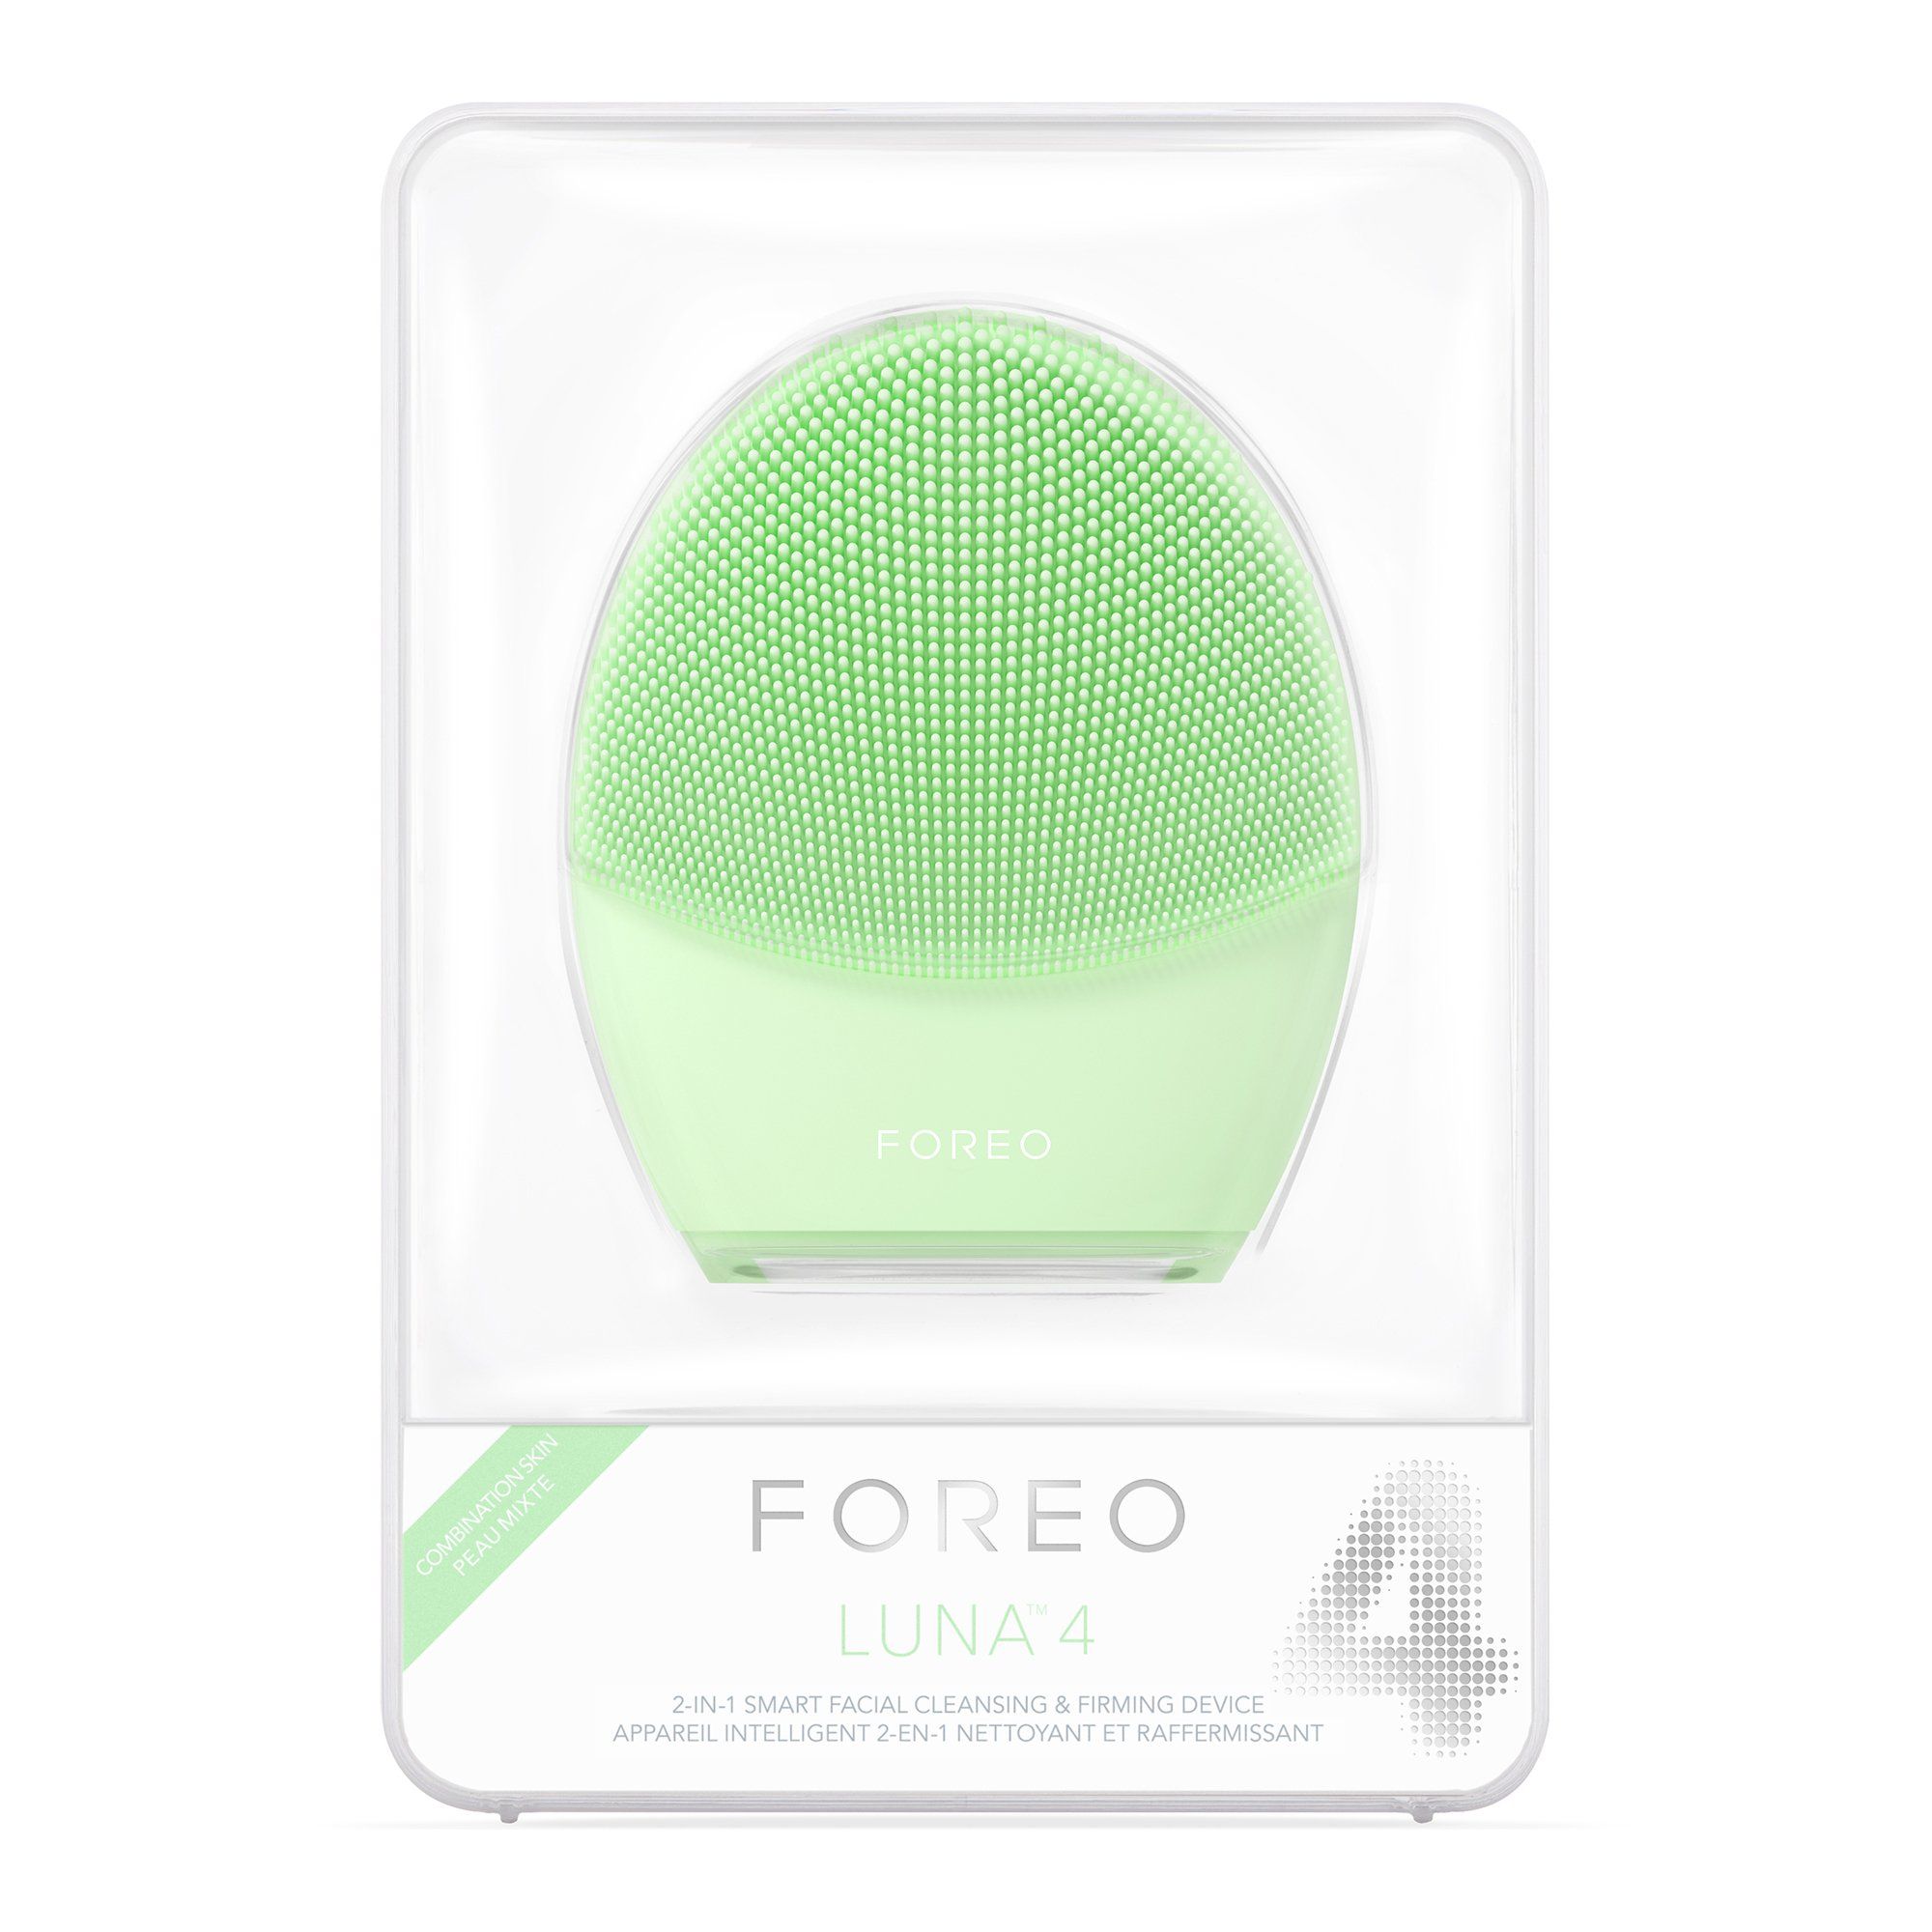 FOREO LUNA™ 4 2-in-1 Smart Facial Cleansing & Firming Device - Combination Skin